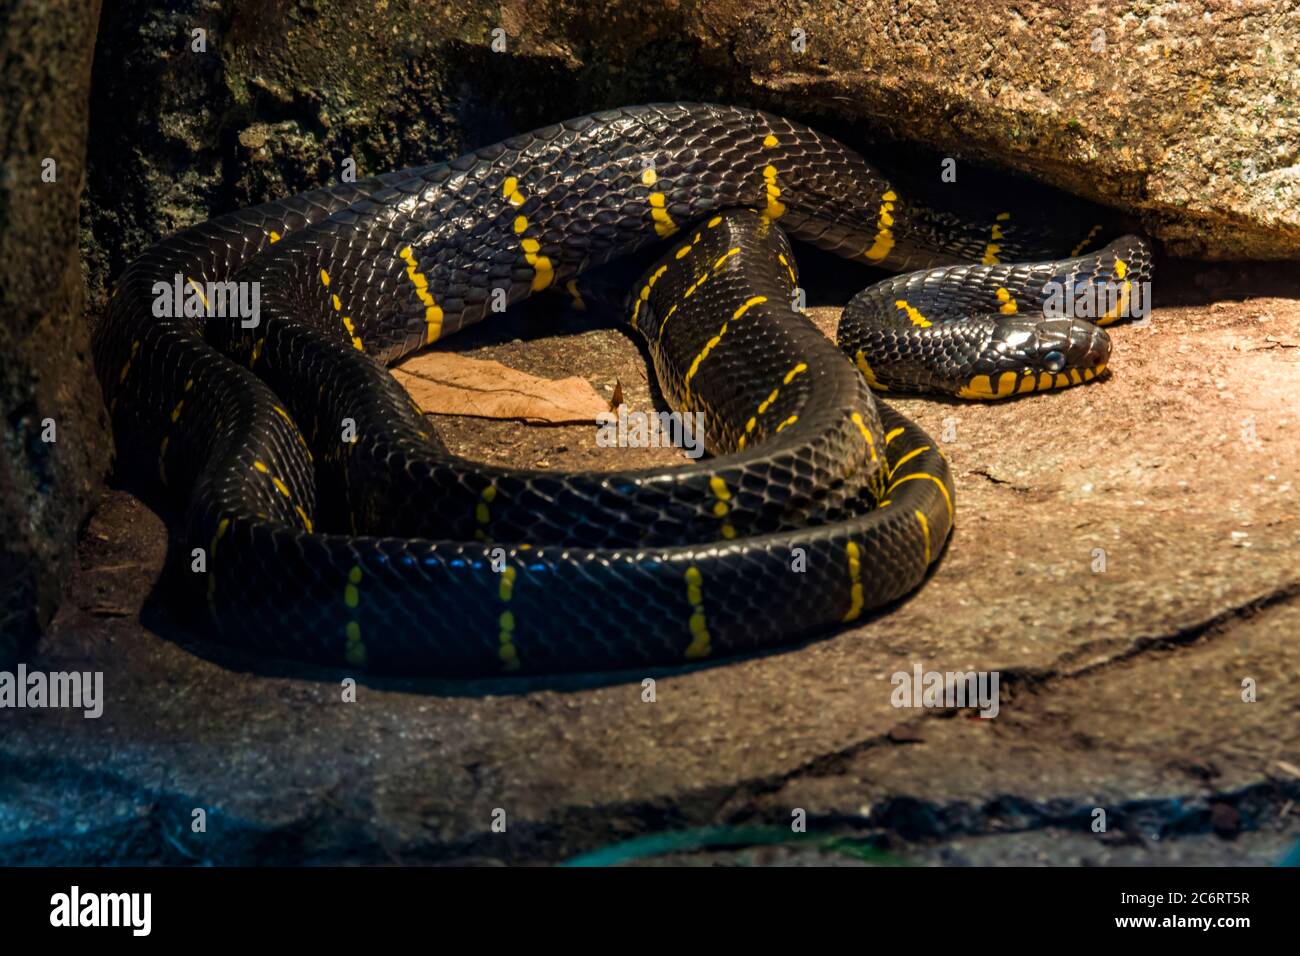 Mangrove snake (Boiga dendrophila) is a species of rear-fanged snake in the family Colubridae. The species is endemic to southeast Asia. Stock Photo